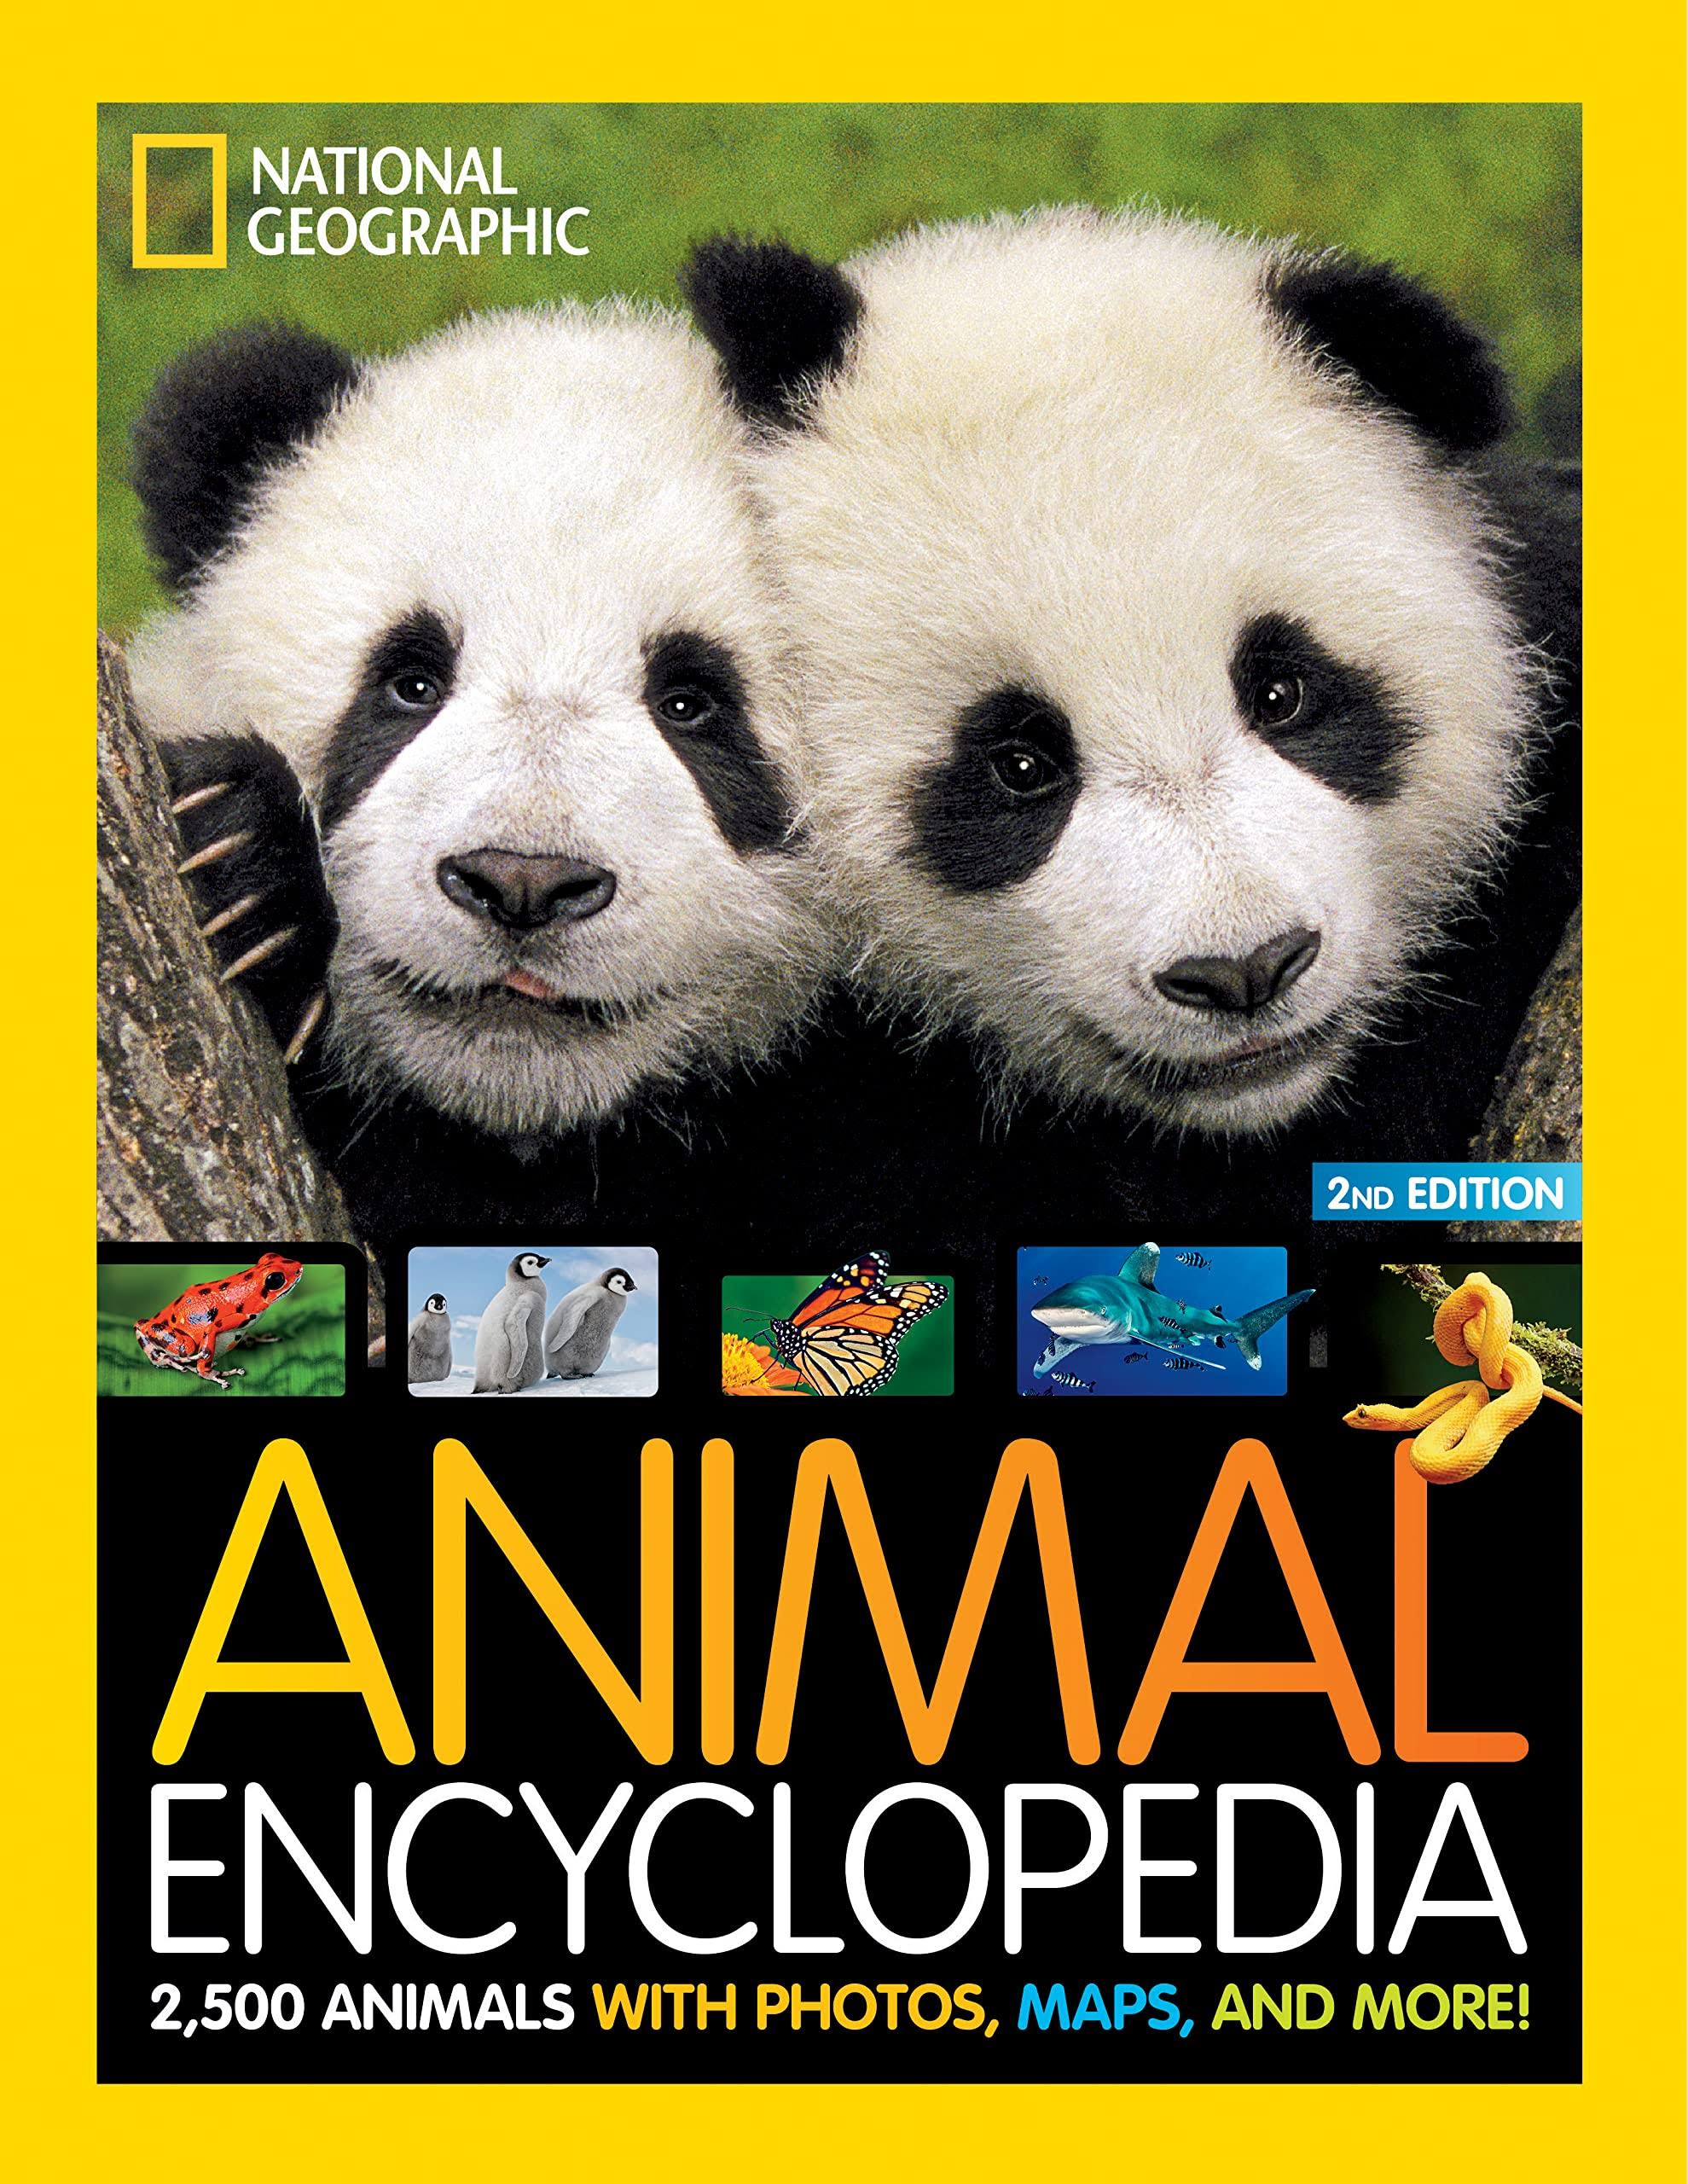 National Geographic Kids Animal Encyclopedia 2nd Edition: 2,500 Animals with Photos, Maps, and More! [Book]